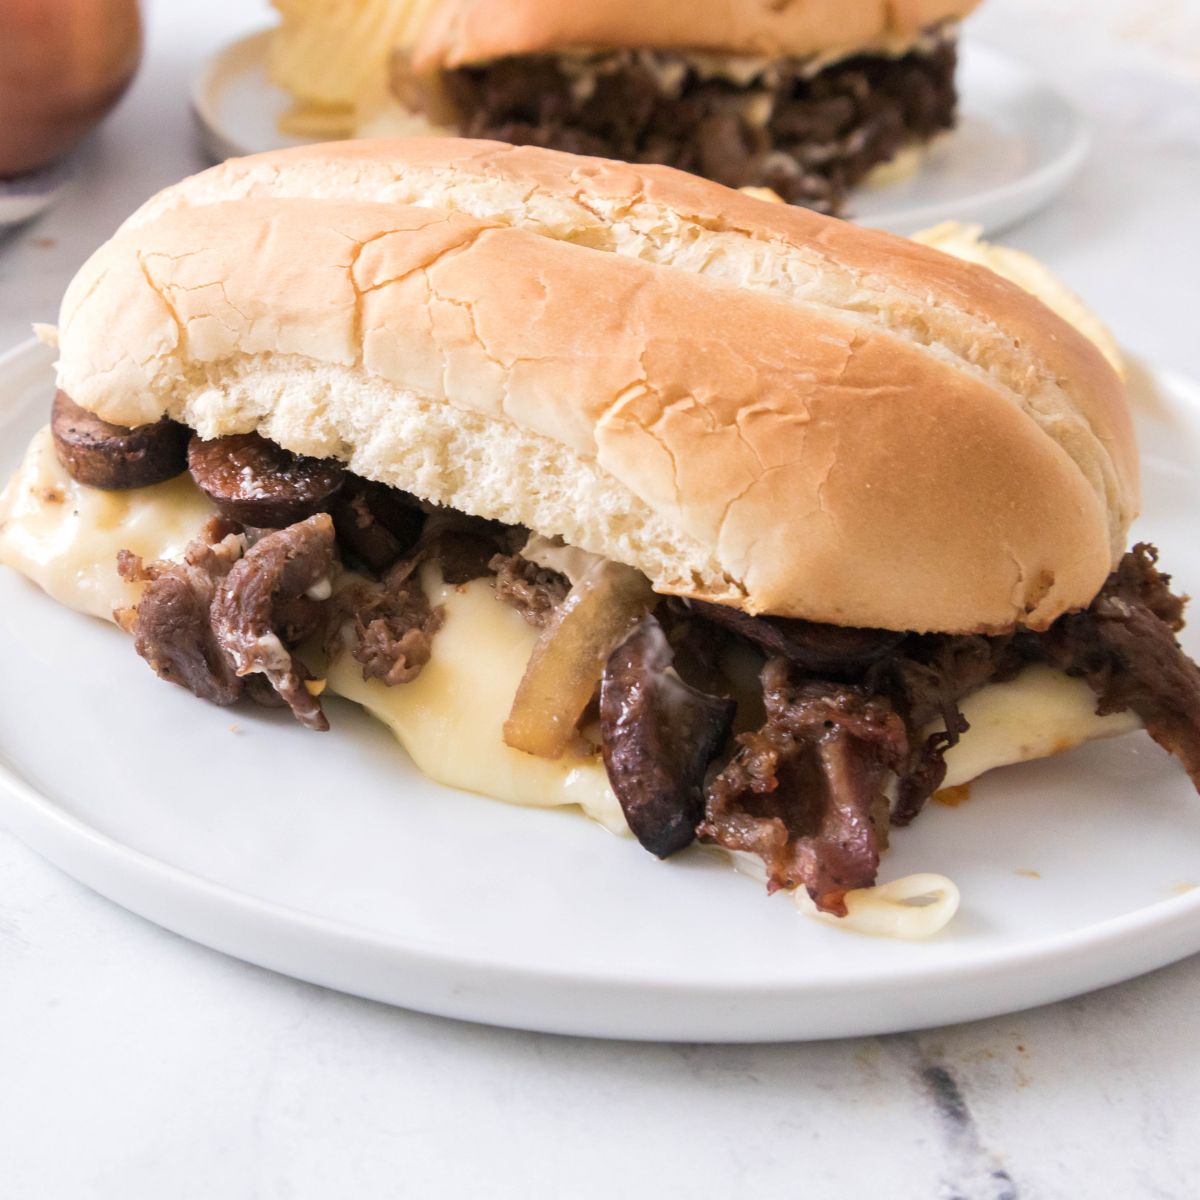 Philly cheesesteak with provolone cheese, mushrooms and onions on hoagie roll on white plate.